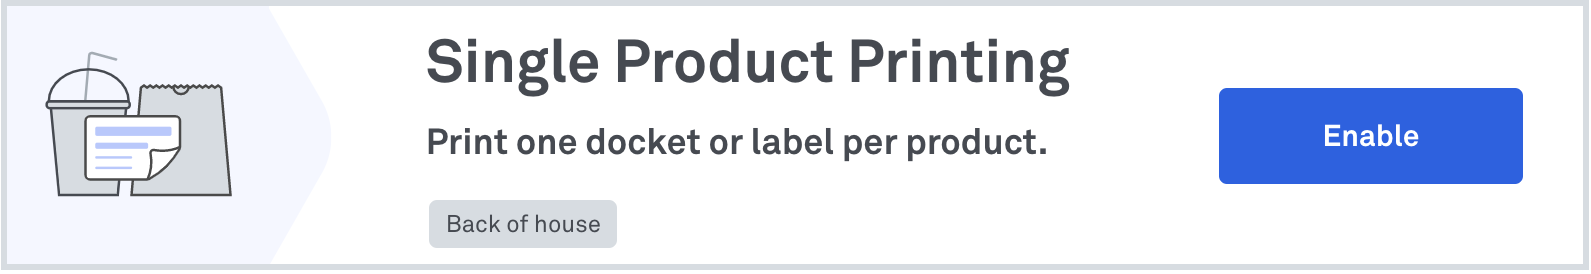 Enable_Single_Product_Printing.png